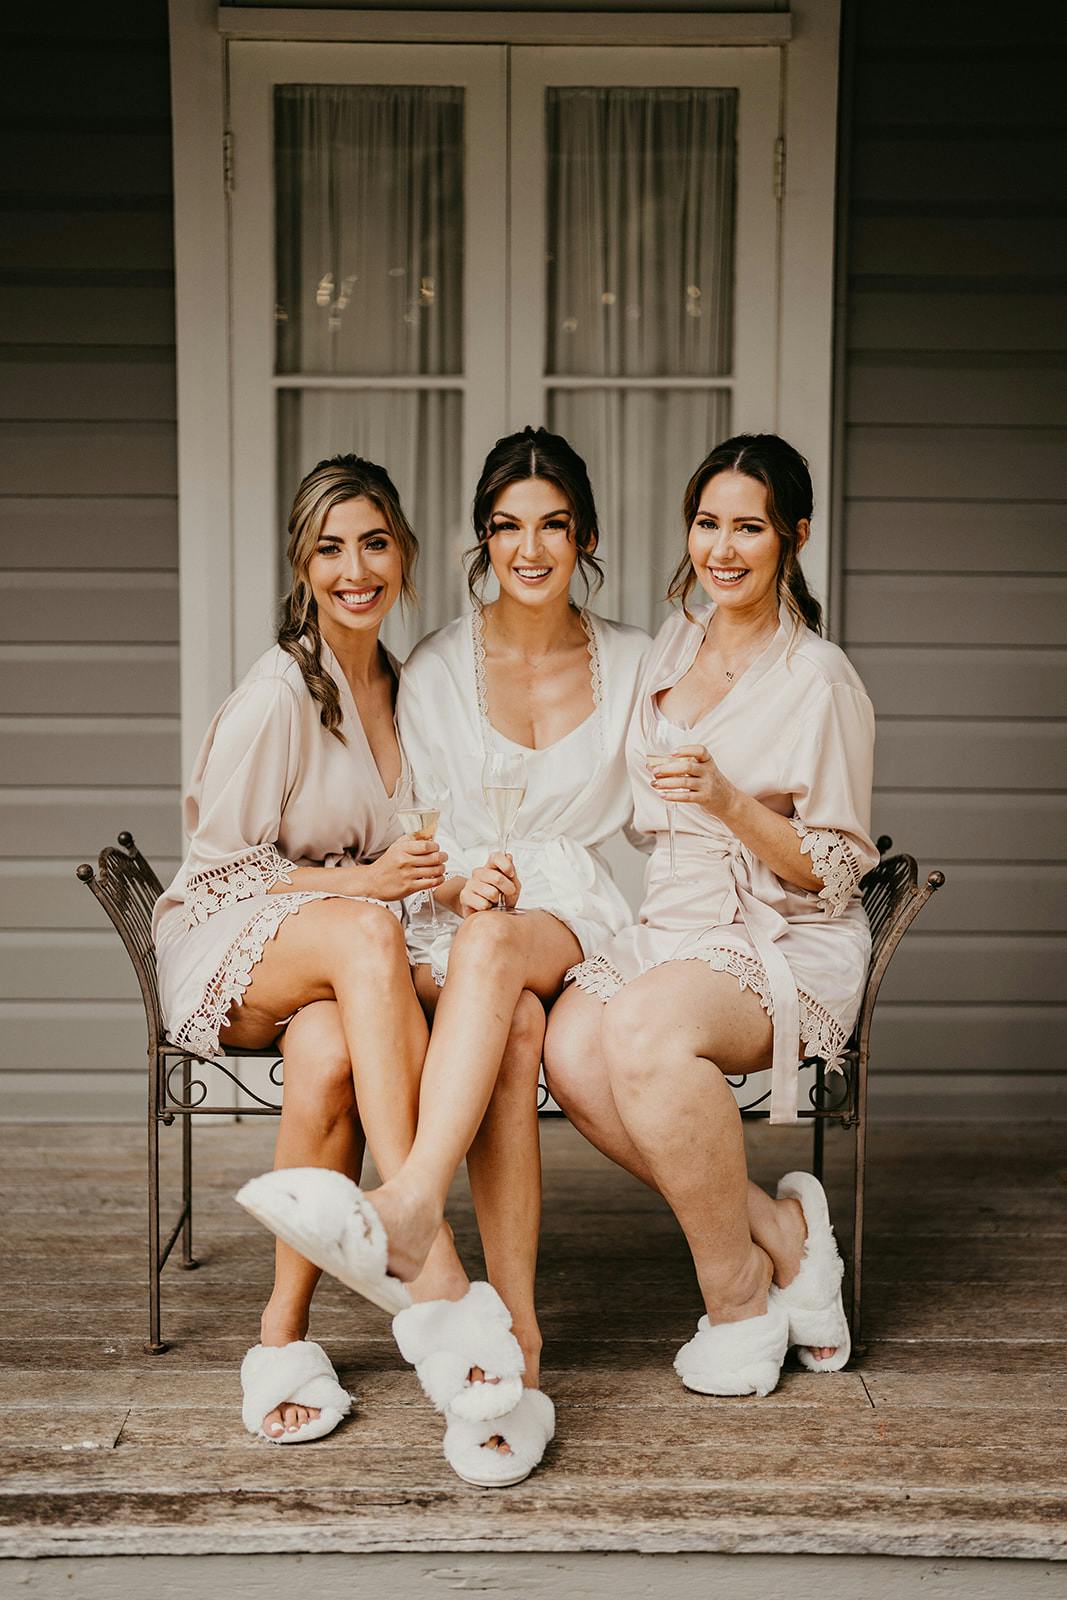 Bride and bridesmaids sitting together